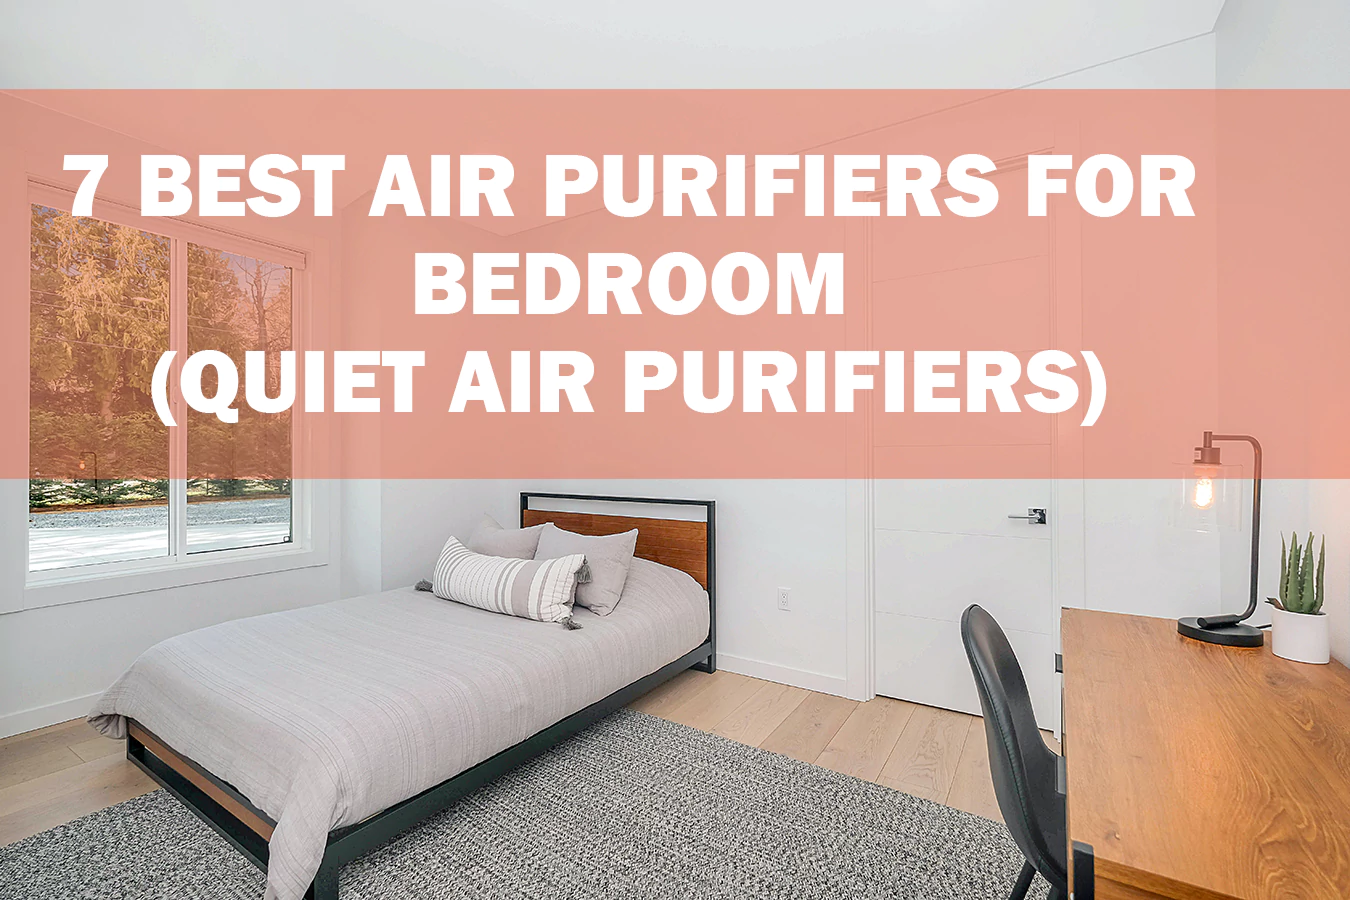 Quiet air purifier ensuring a peaceful and clean bedroom atmosphere